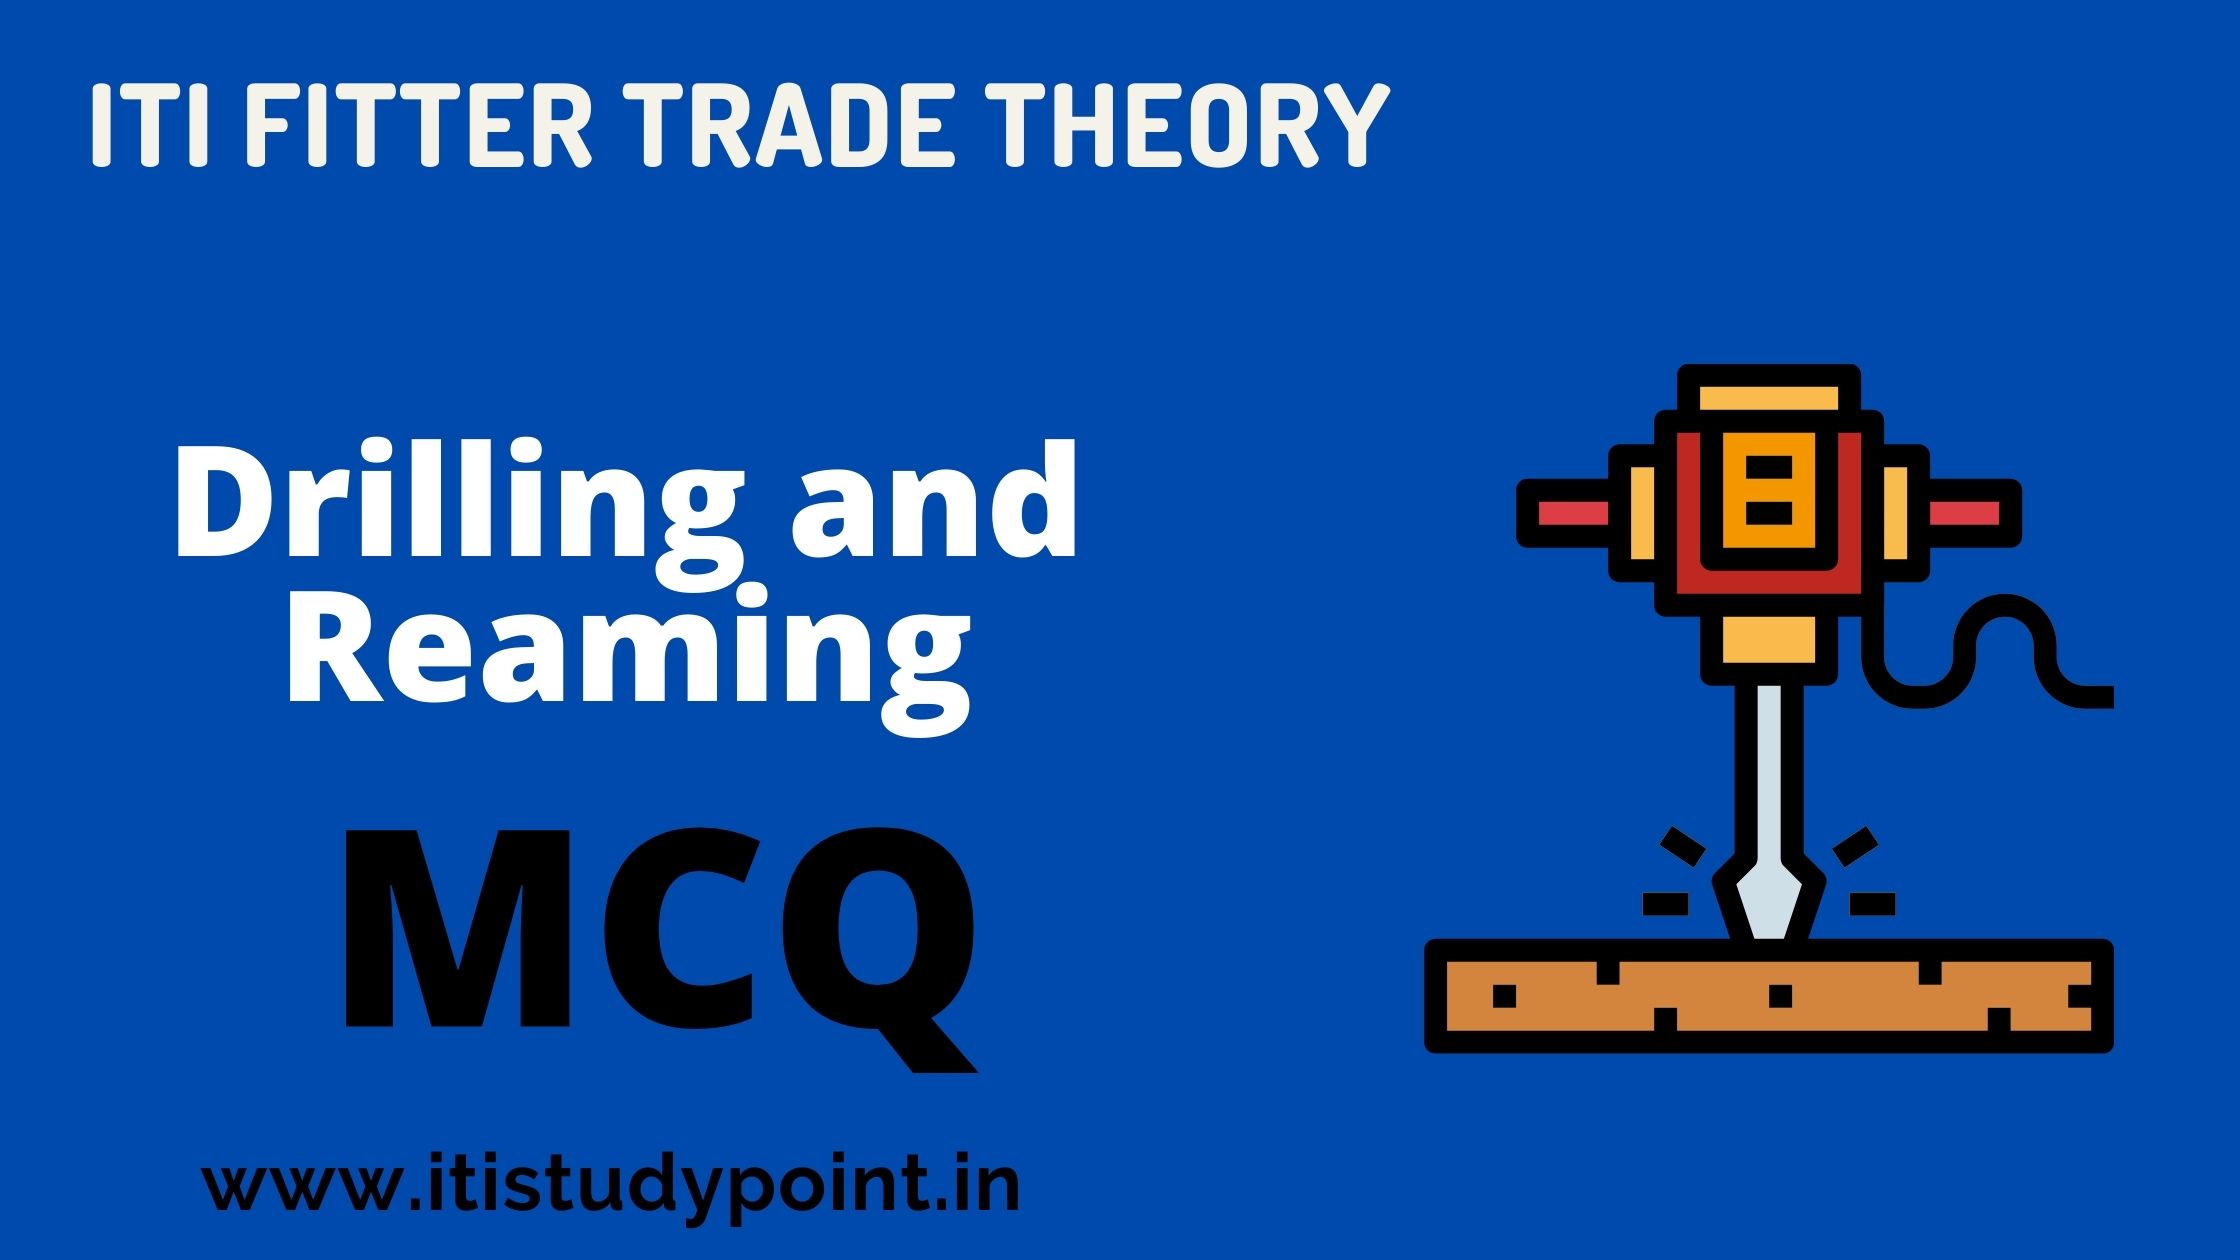 Drilling and Reaming MCQ 2 || ITI Fitter Trade Theory ||